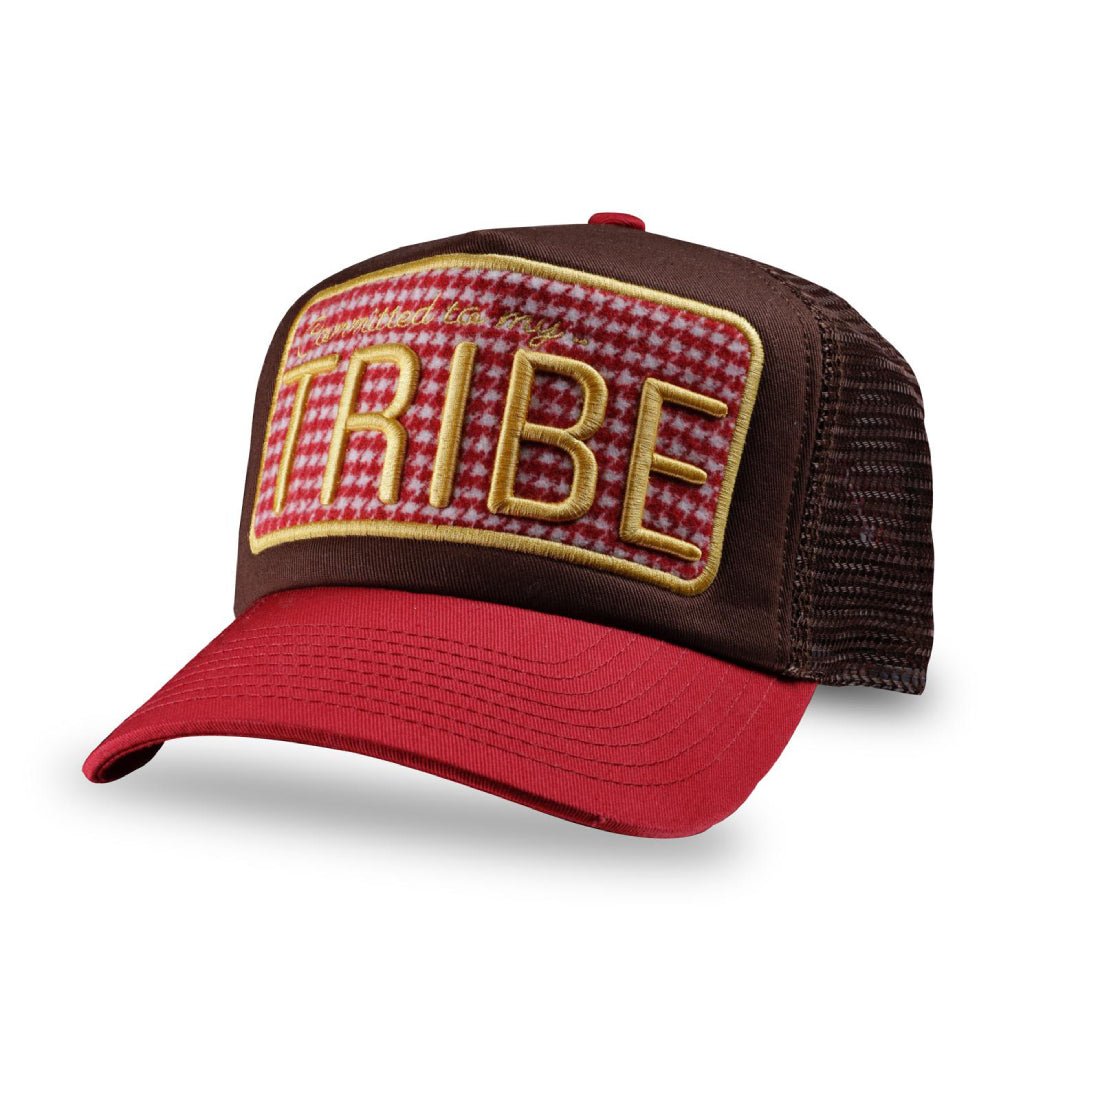 Tribe Culture Design Adults Cap - Red/White - قبعة - Store 974 | ستور ٩٧٤